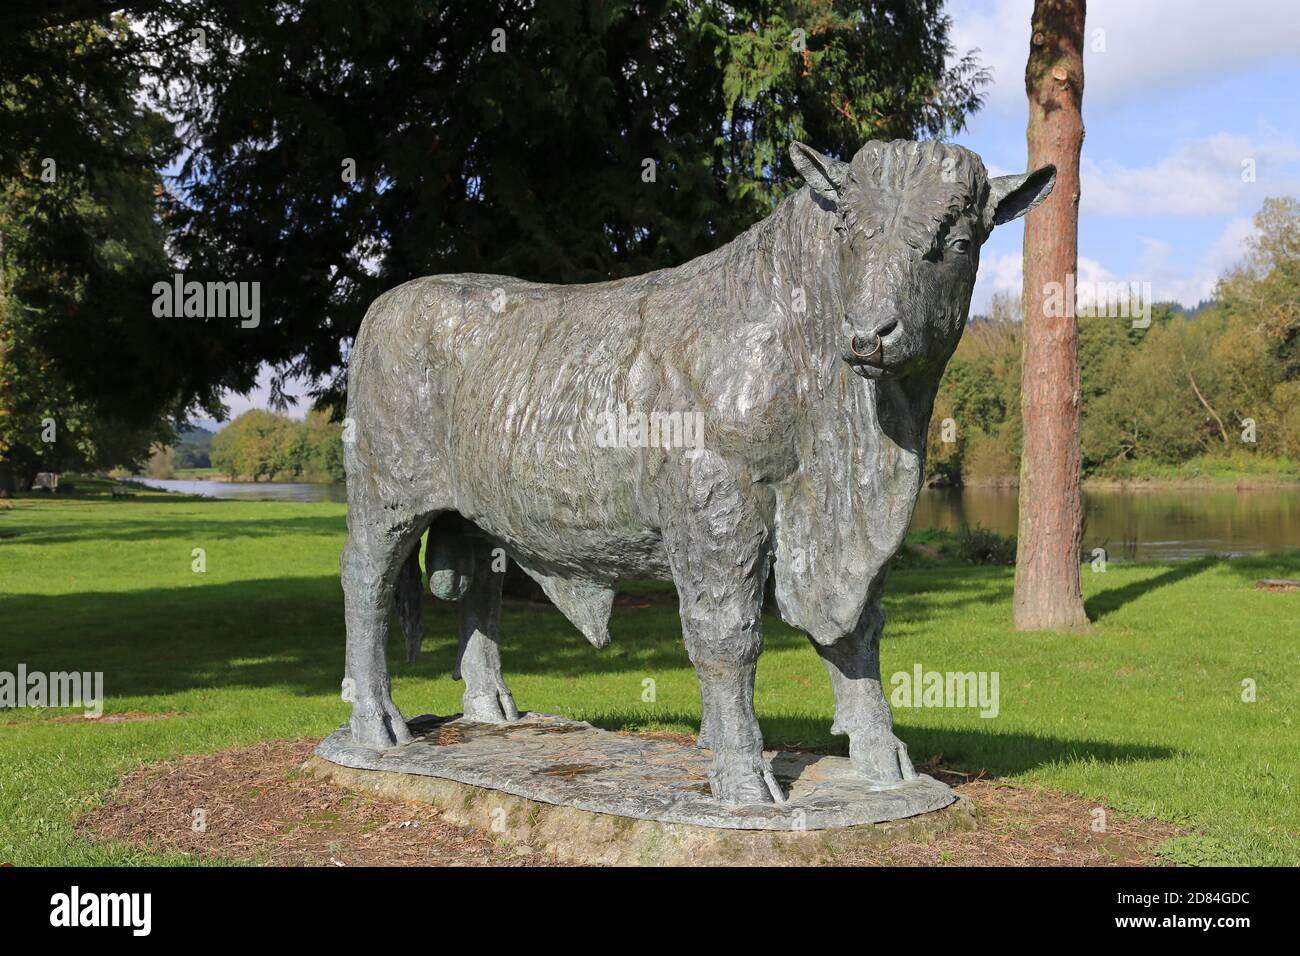 Life-size Welsh Black Bull statue, Groe Park, The Strand, Builth Wells, Brecknockshire, Powys, Wales, Great Britain, United Kingdom, UK, Europe Stock Photo